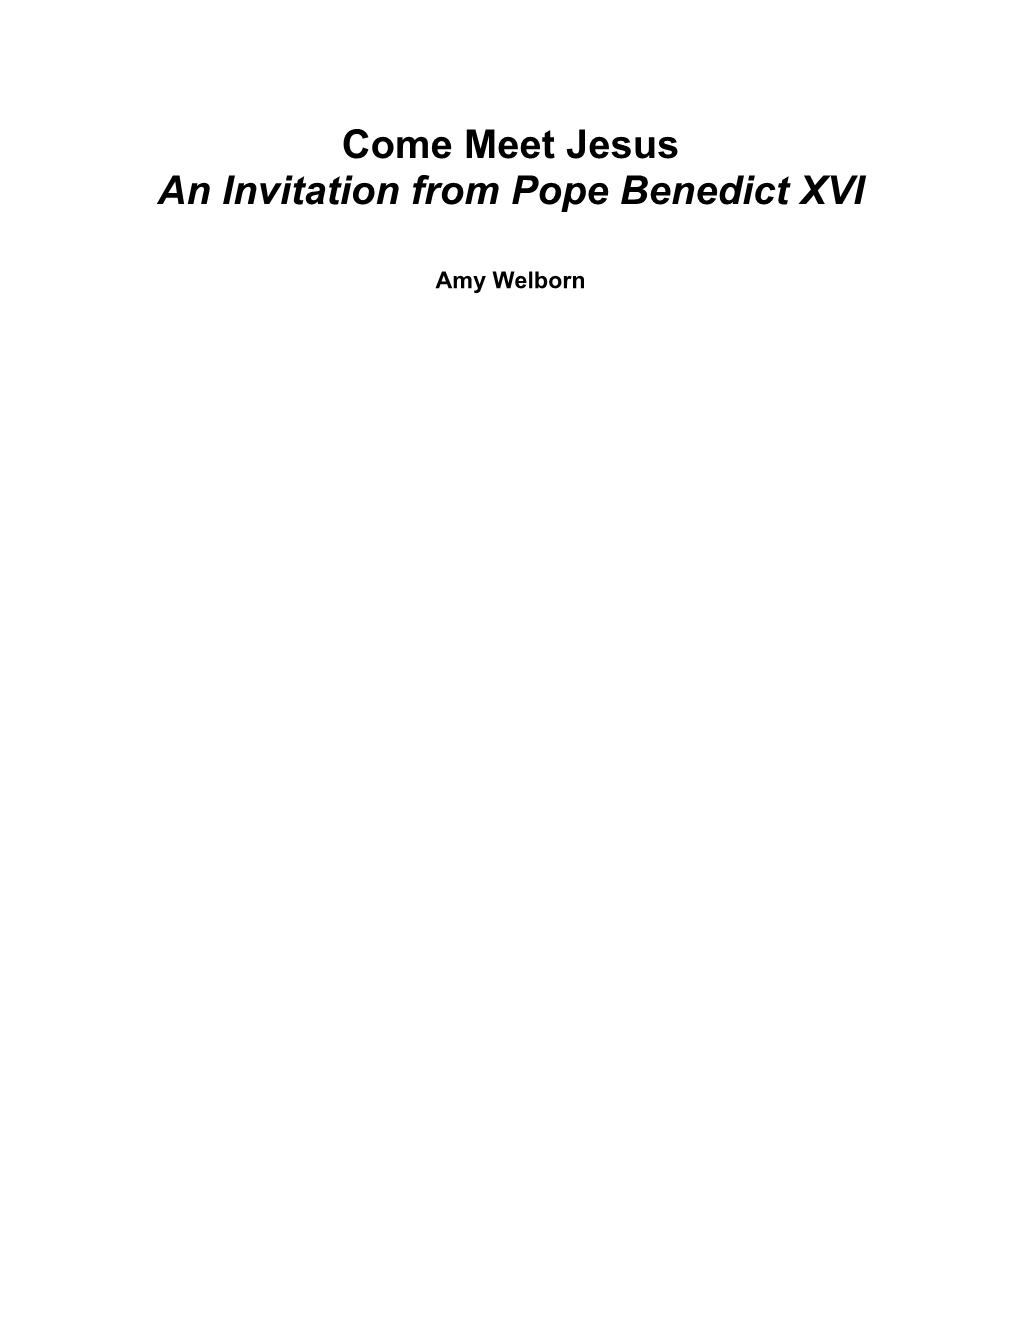 Come Meet Jesus an Invitation from Pope Benedict XVI